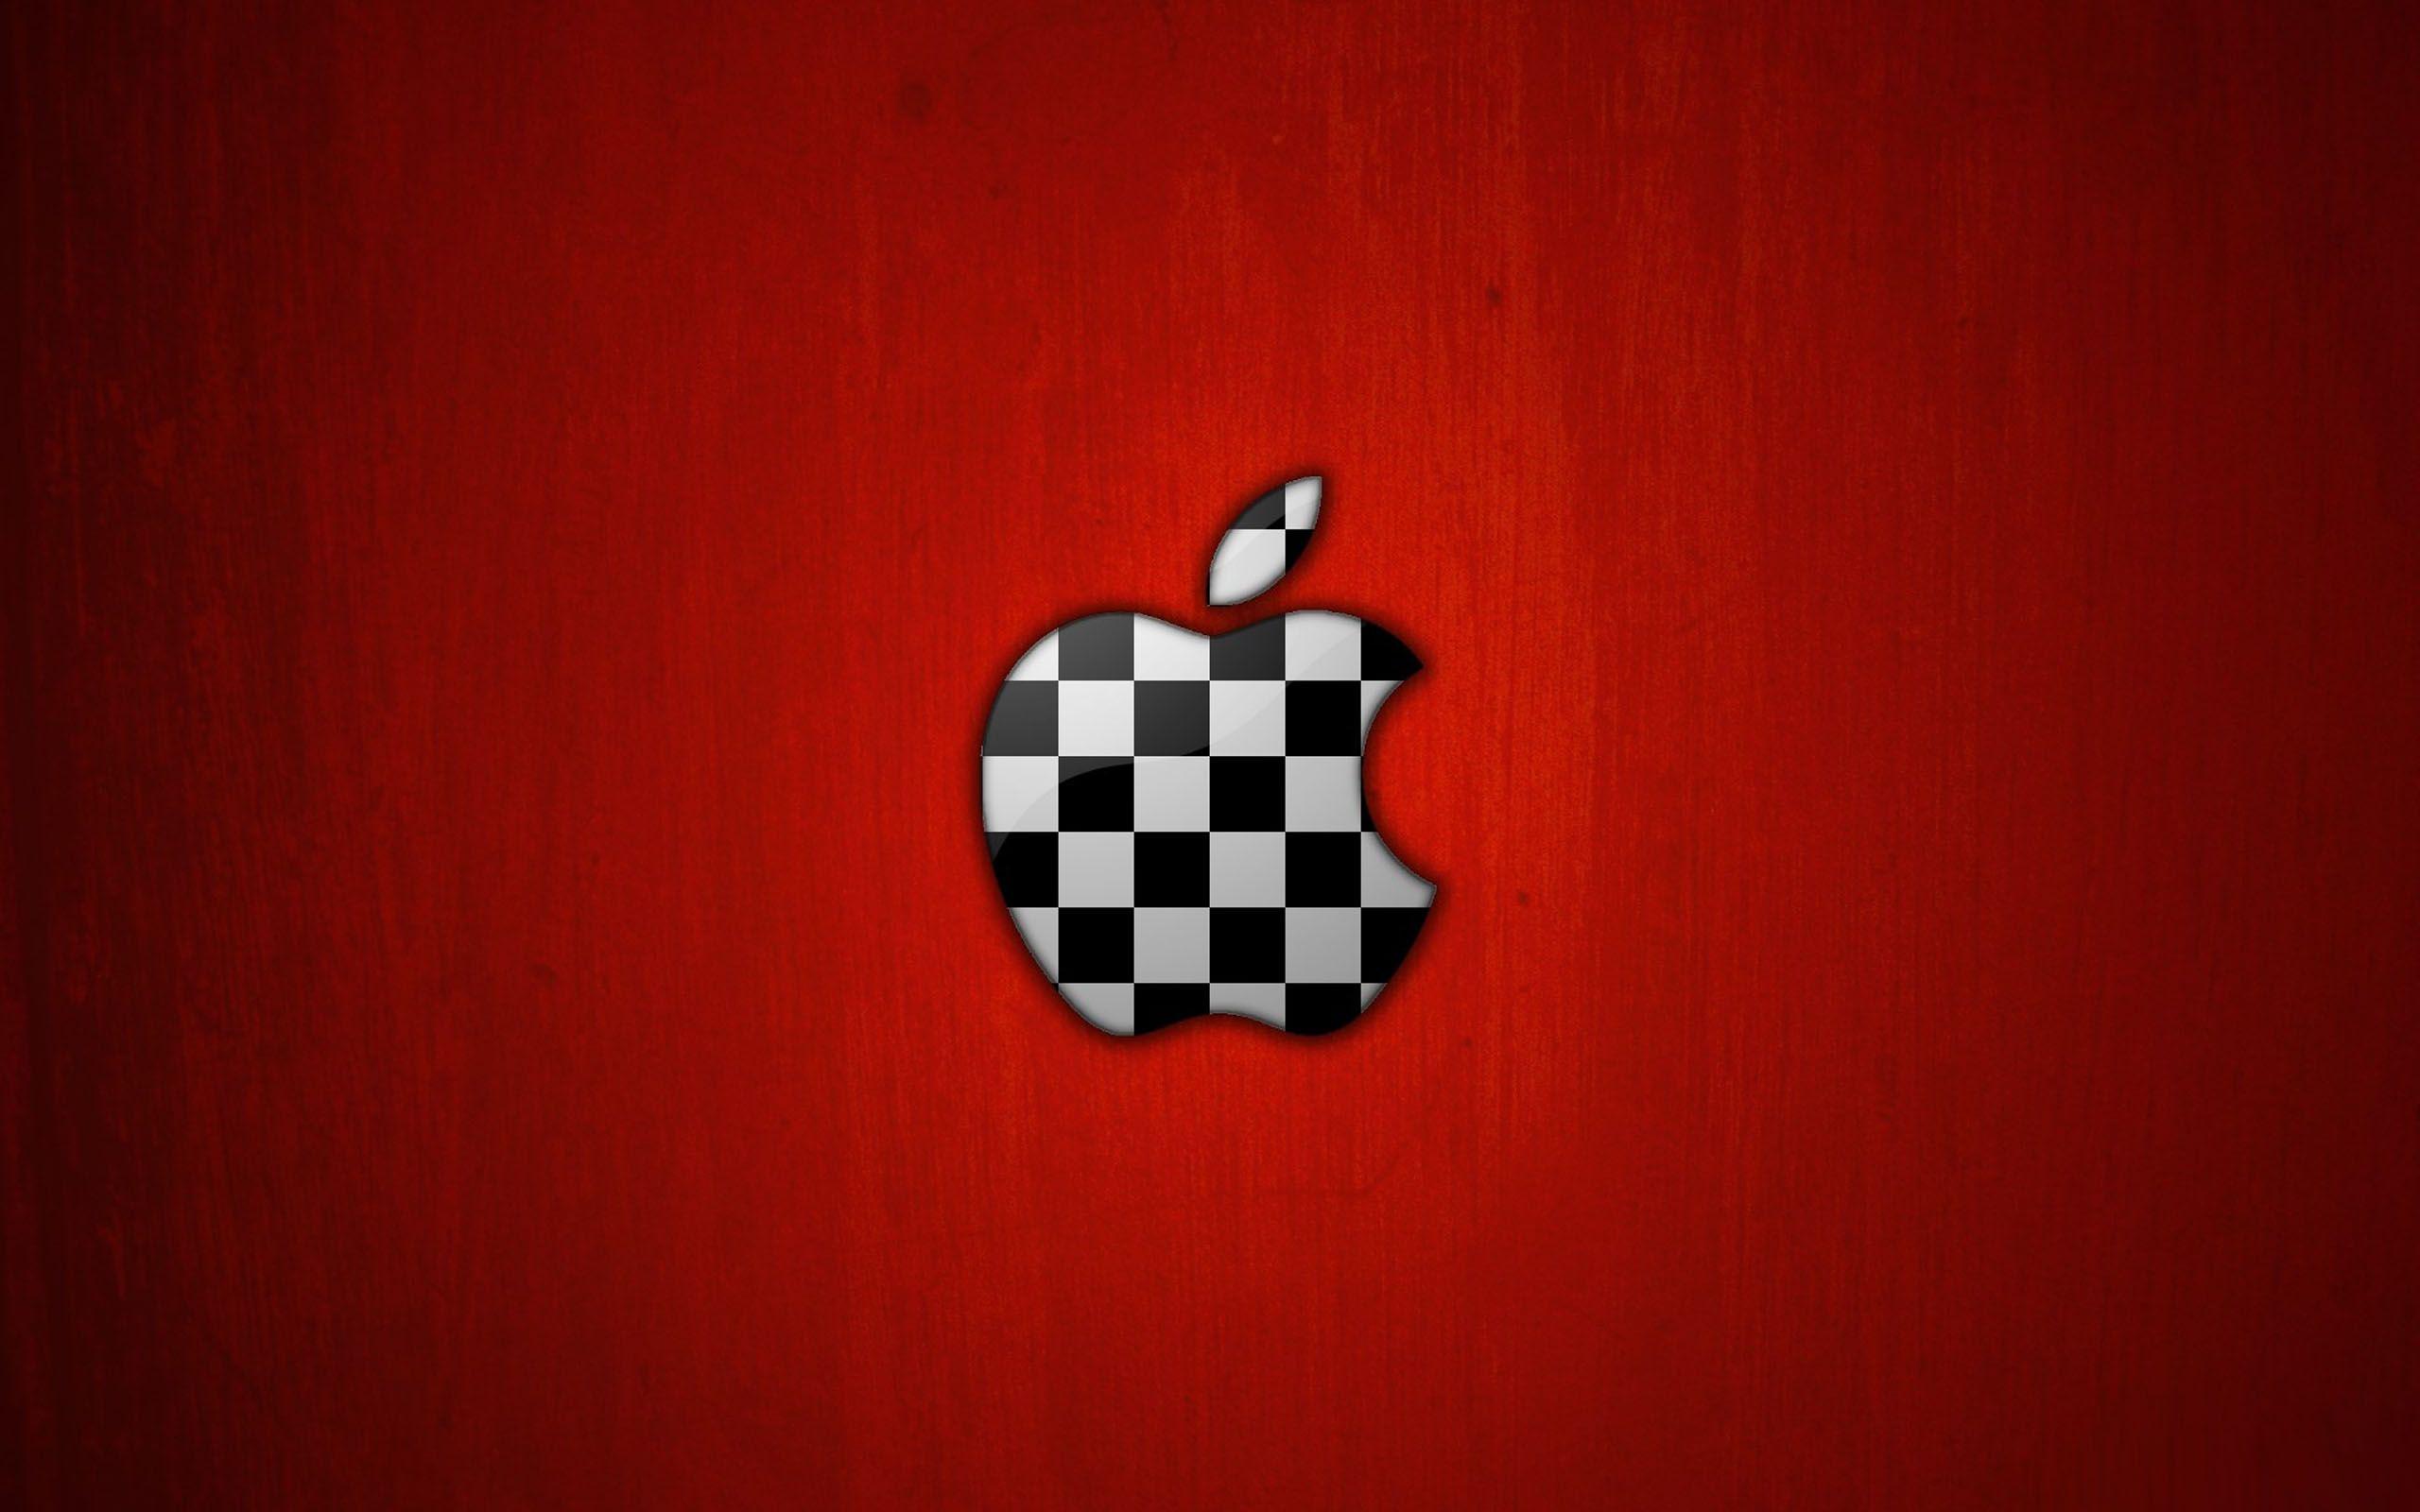 Red Apple Wallpaper HD (Picture)